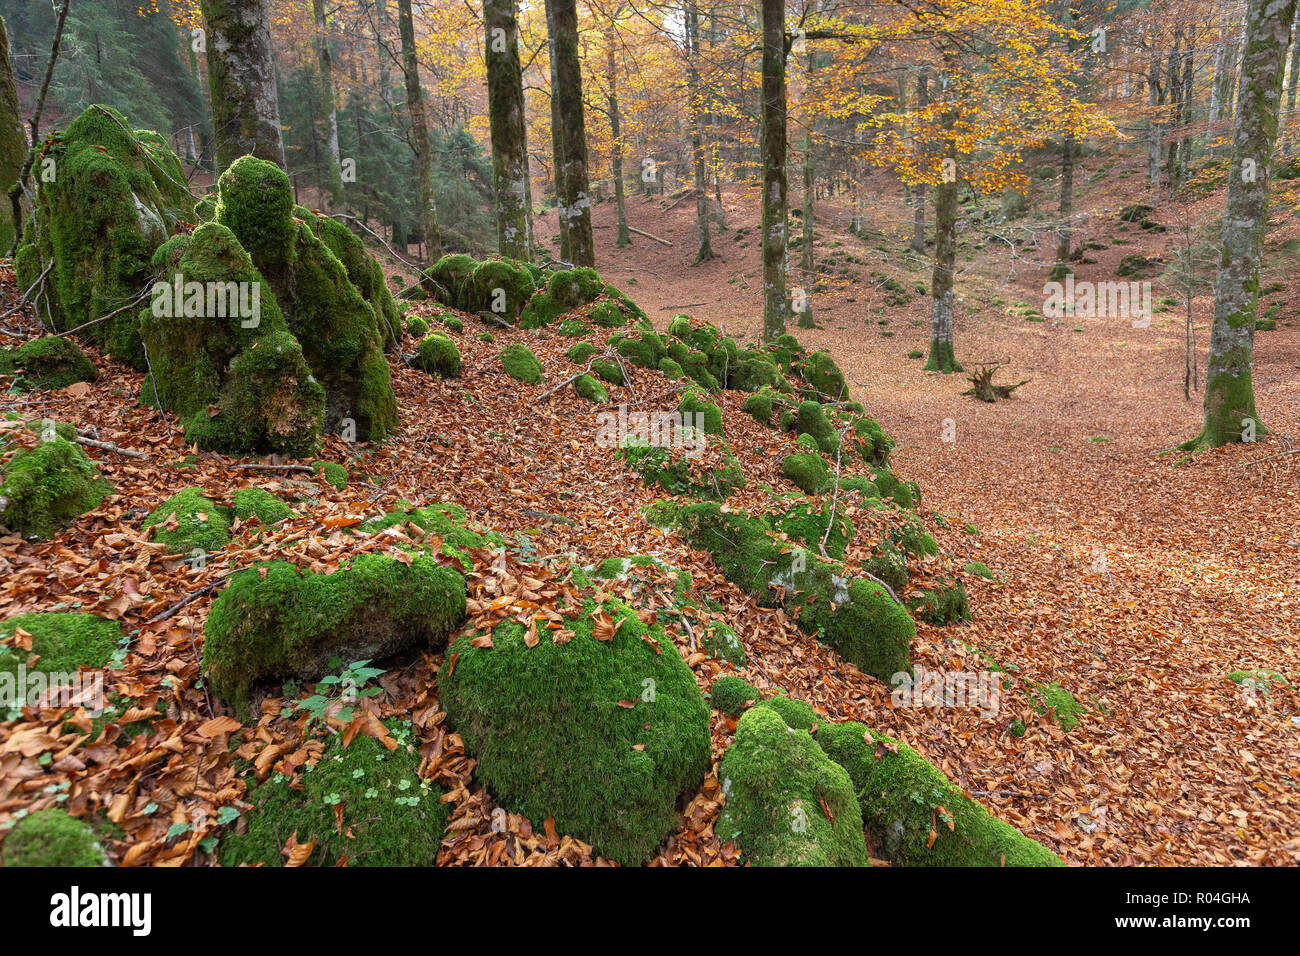 The Cansiglio forest. Woodland, rocks covered with moss. Autumn season. Prealpi Venete. Italy. Europe. Stock Photo